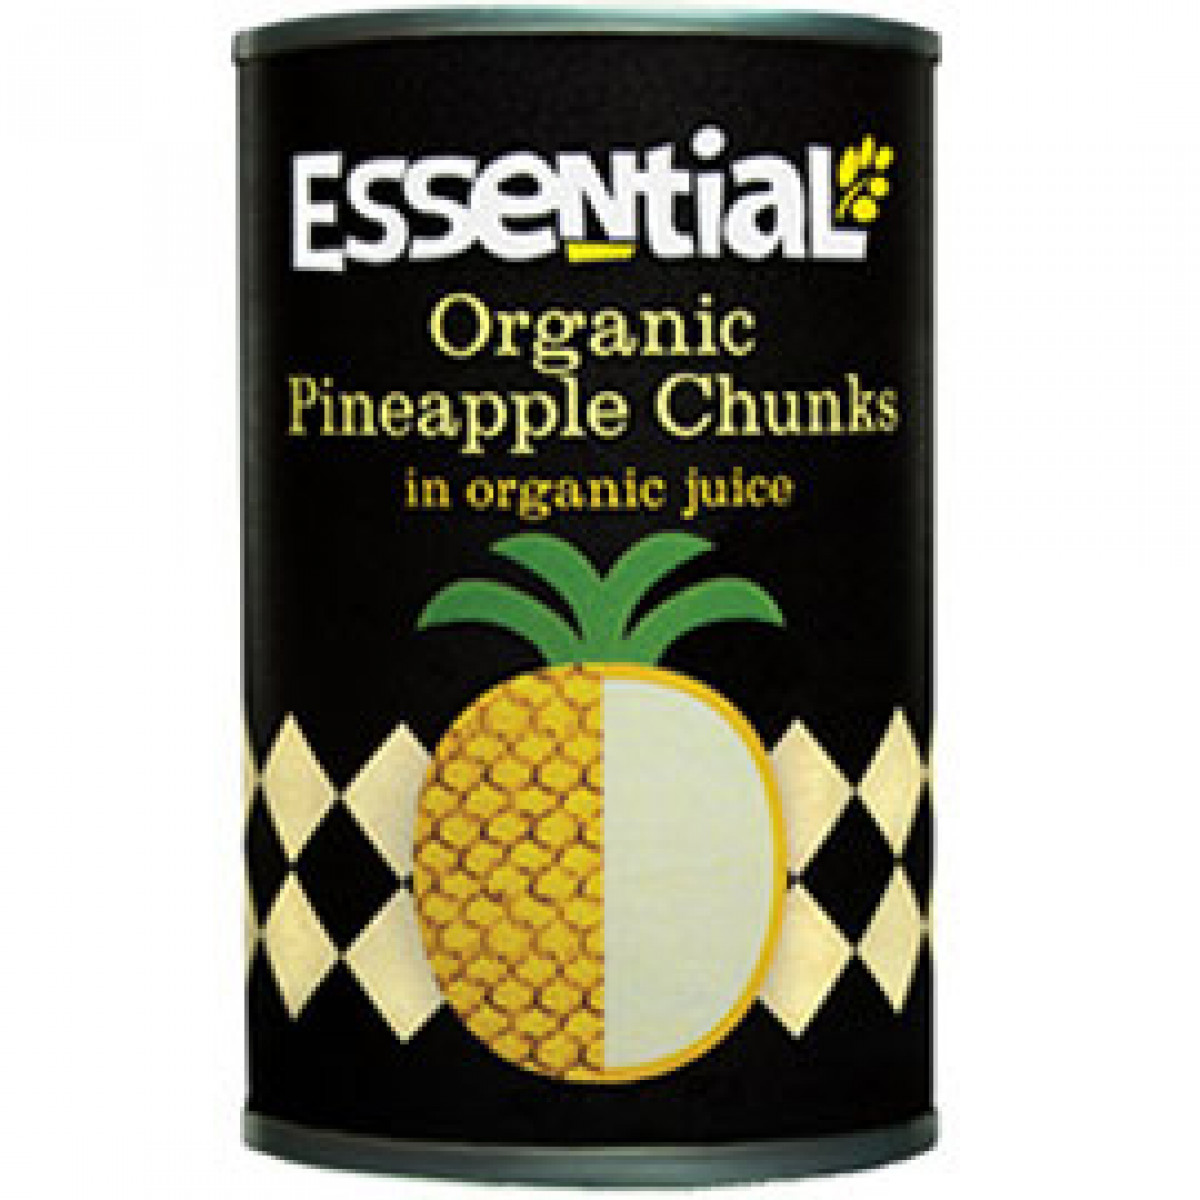 Product picture for Pineapple Chunks in Juice